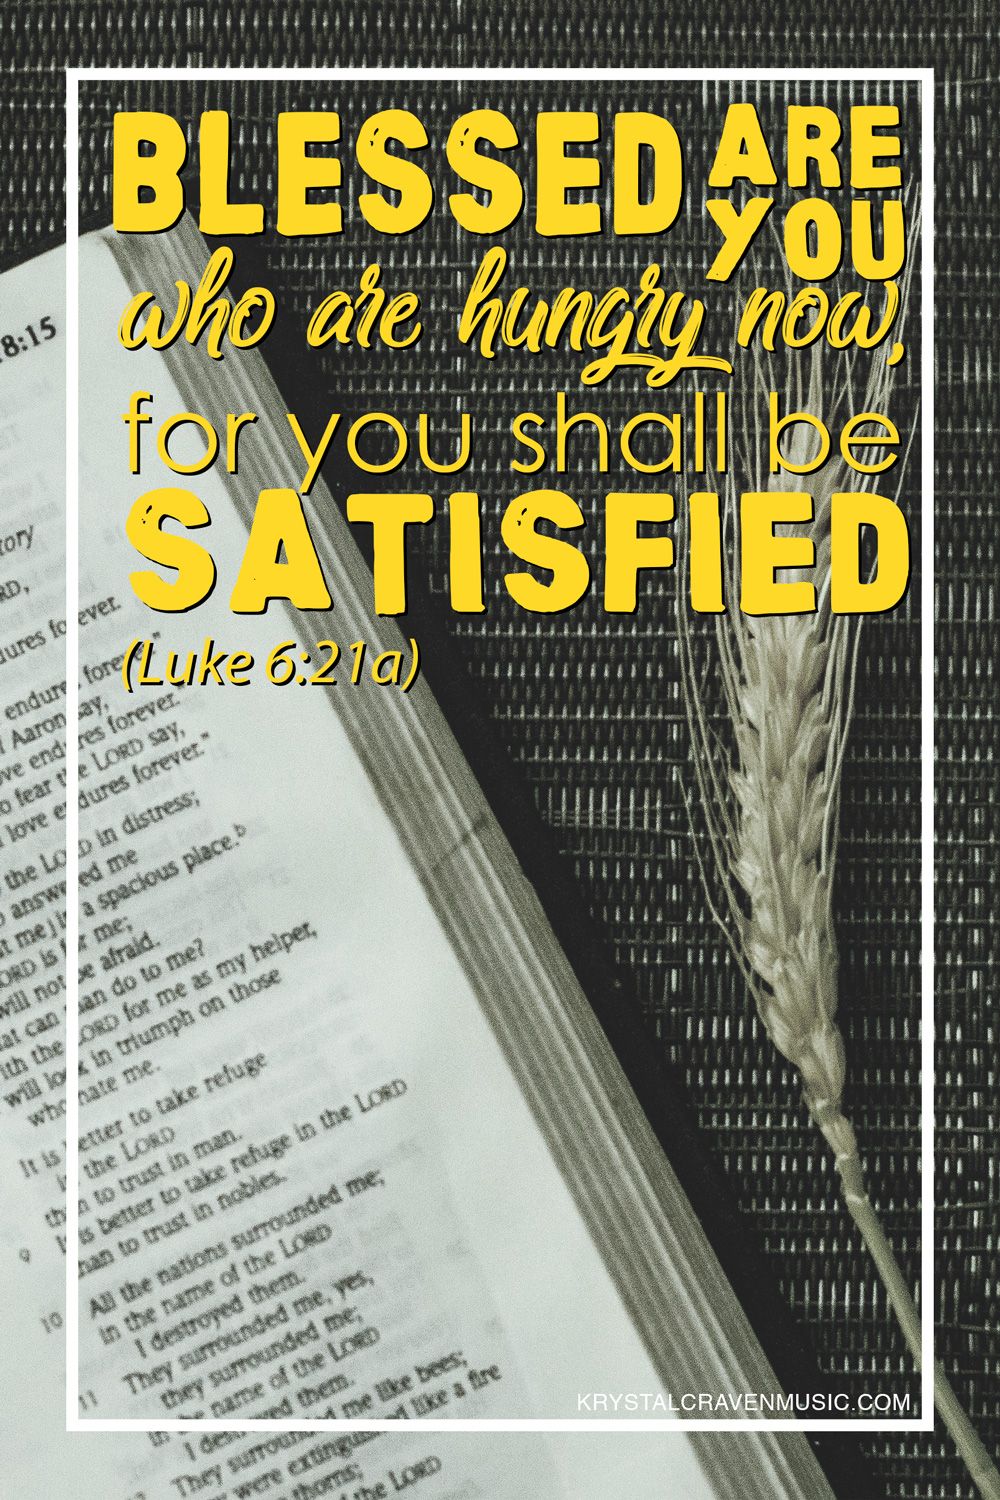 The devotional title text "Blessed are the Hungry" overlaying a top down image of an open Bible on a placemat with a couple strands of wheat laying next to it.